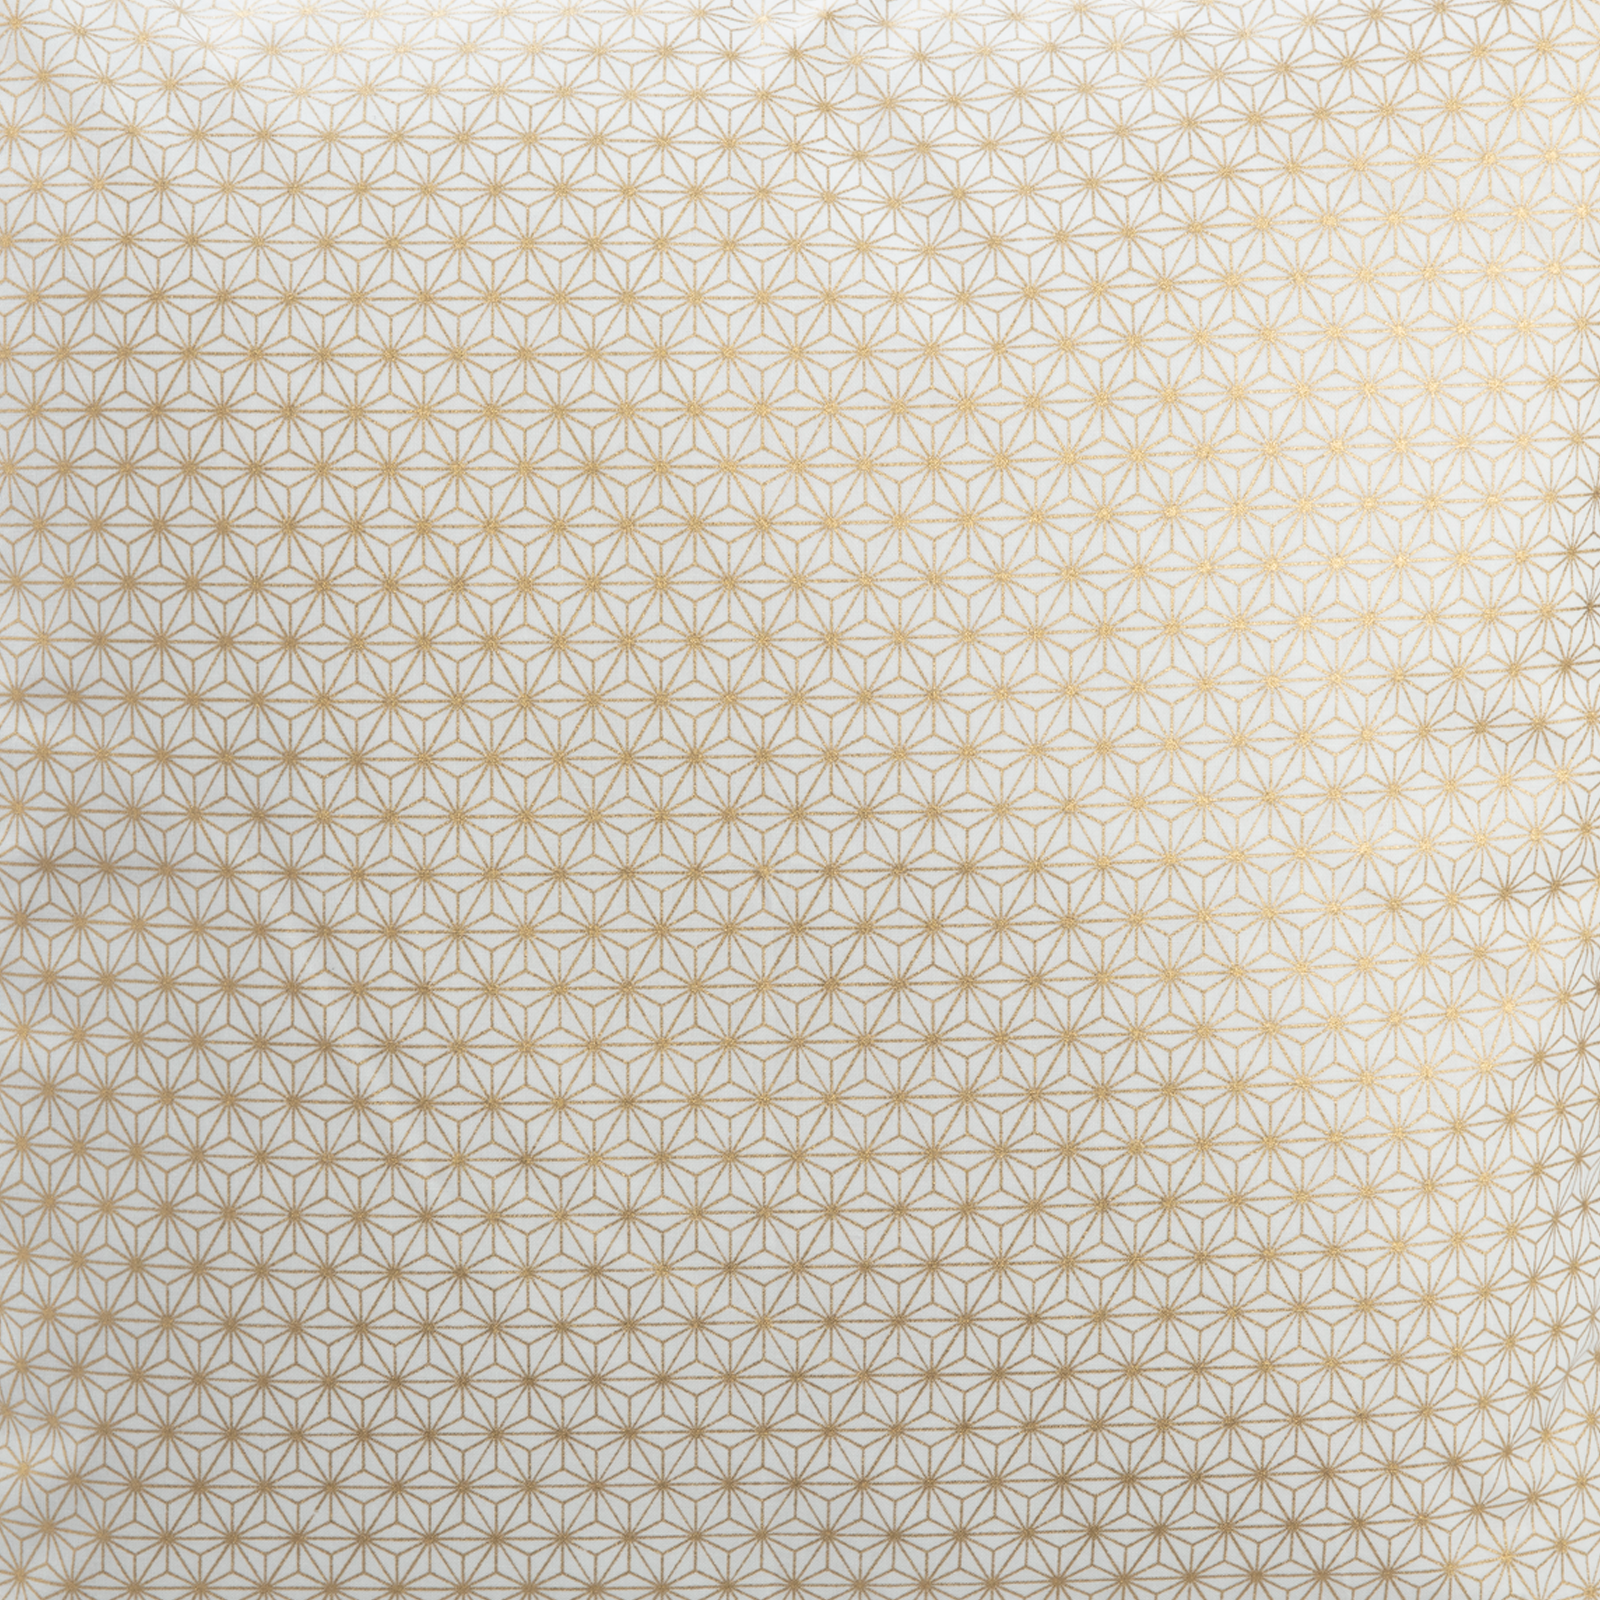 Imported Japanese Fabric - Asa No Ha Gold Sparkle_Fabric_Imported from Japan_100% Cotton_Japanese Sleep System